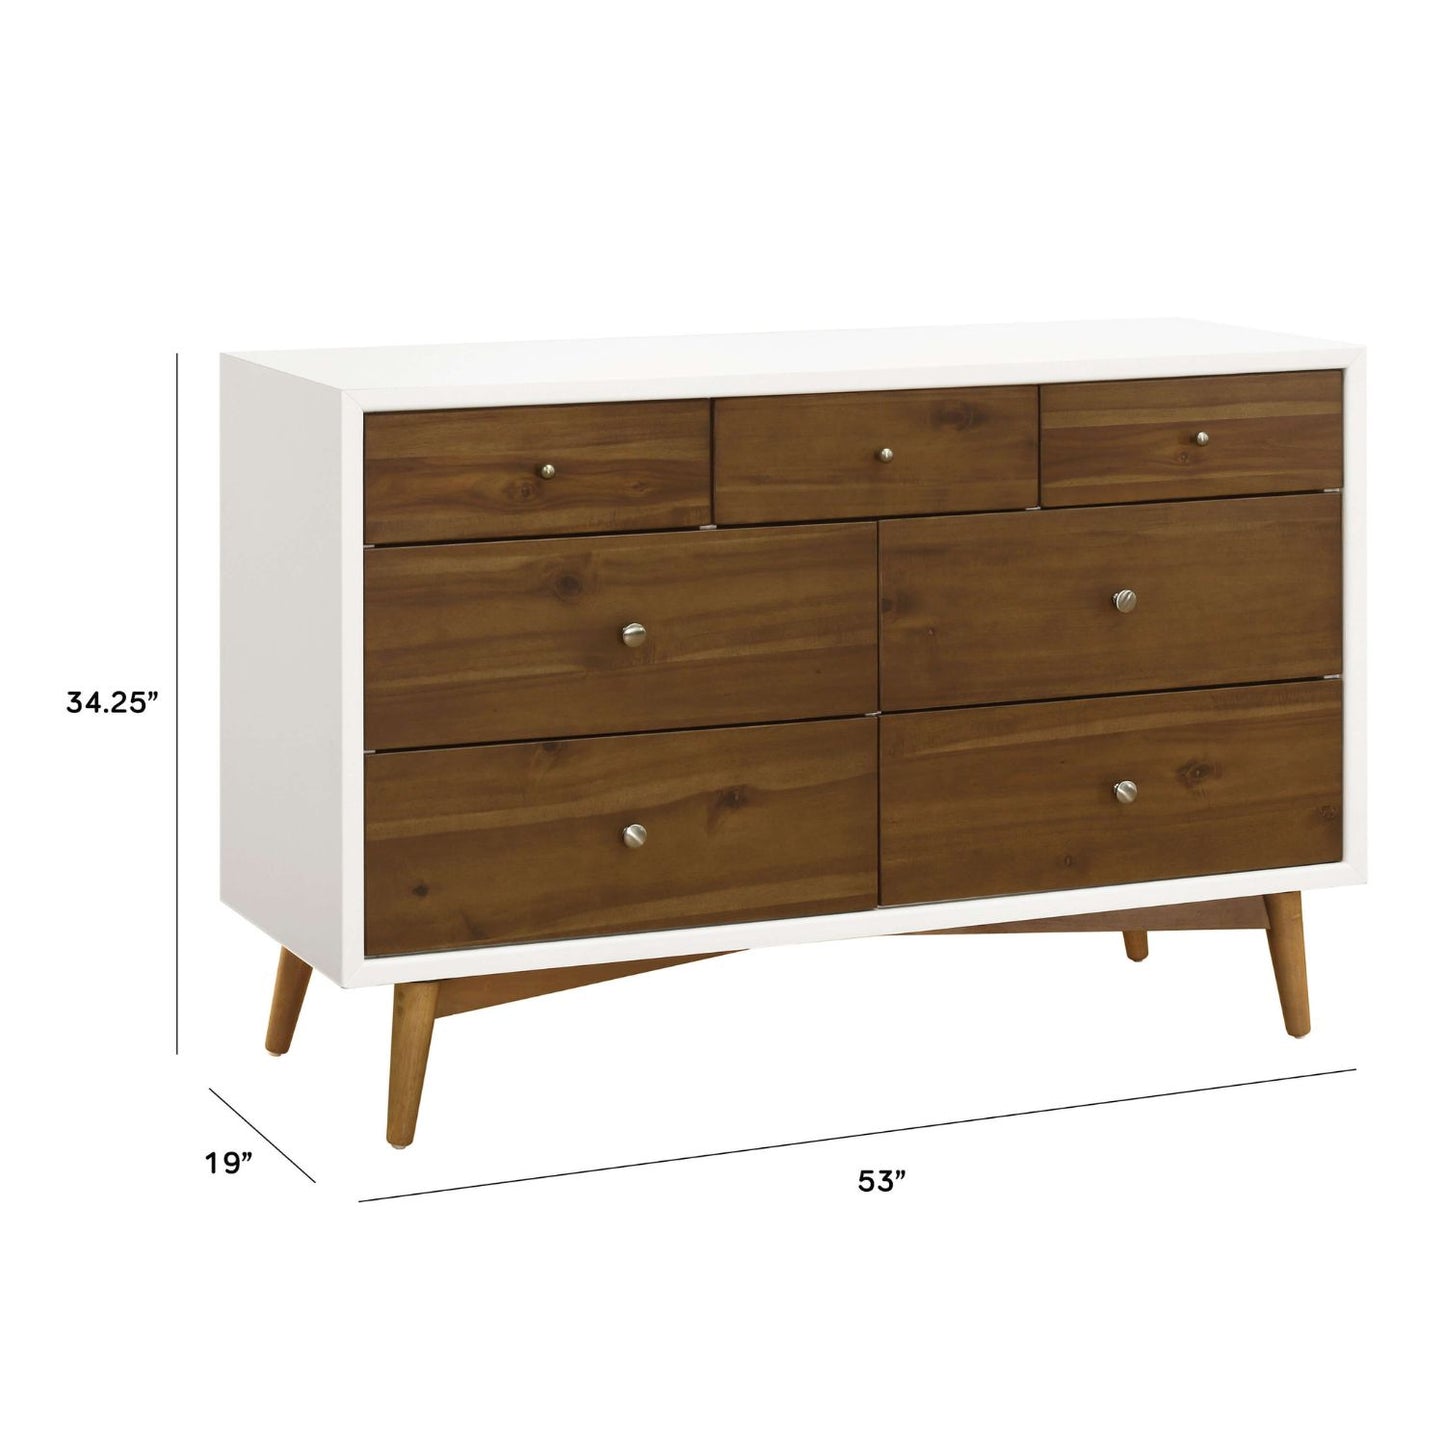 Babyletto Palma 7-Drawer Assembled Double Dresser - Warm White/Natural Walnut